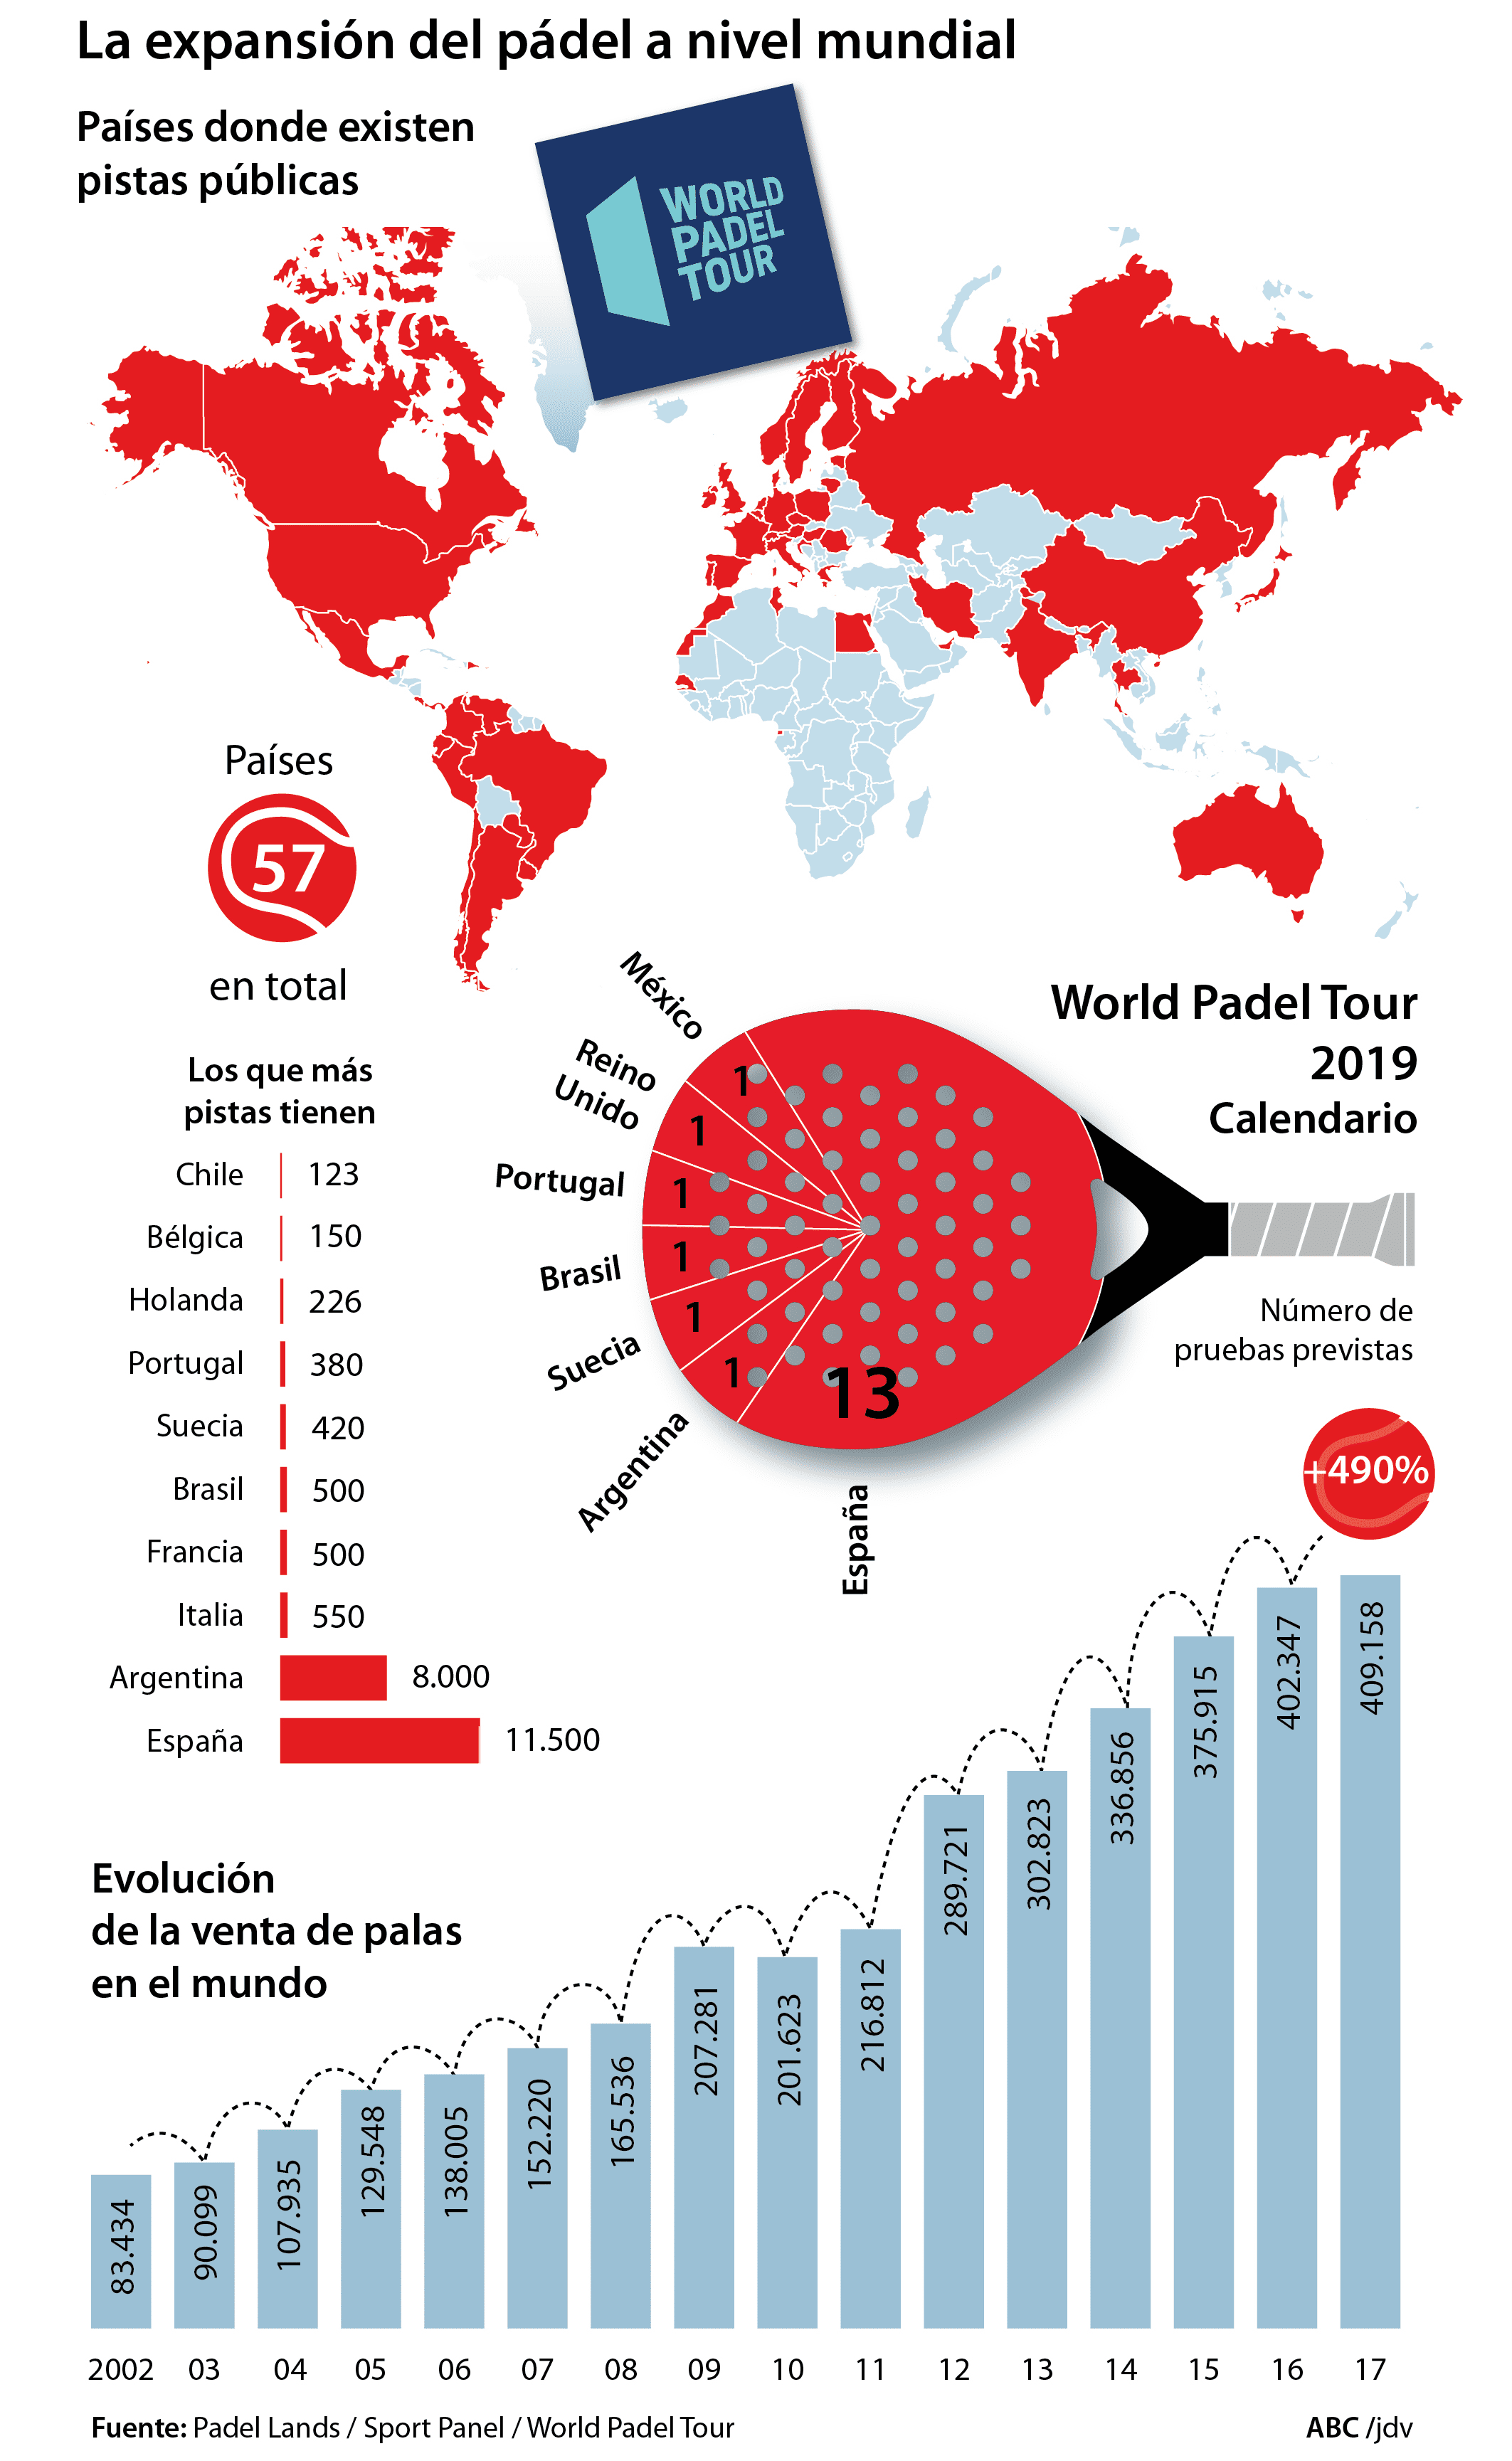 Worldwide expansion of Padel